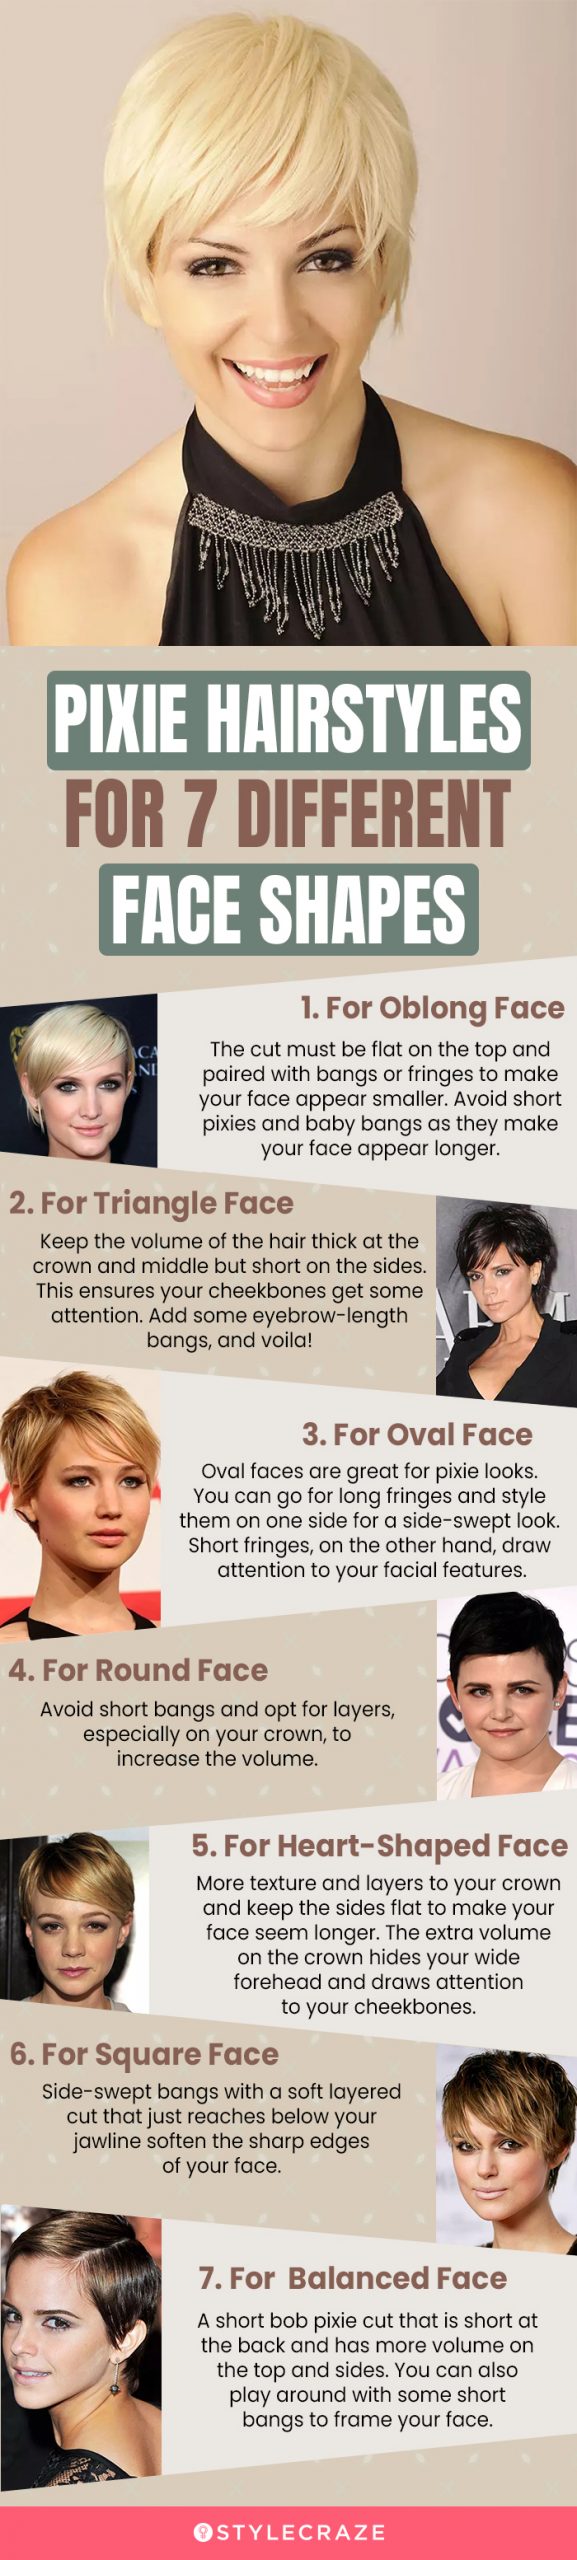 pixie hairstyles for 7 different face shapes (infographic)